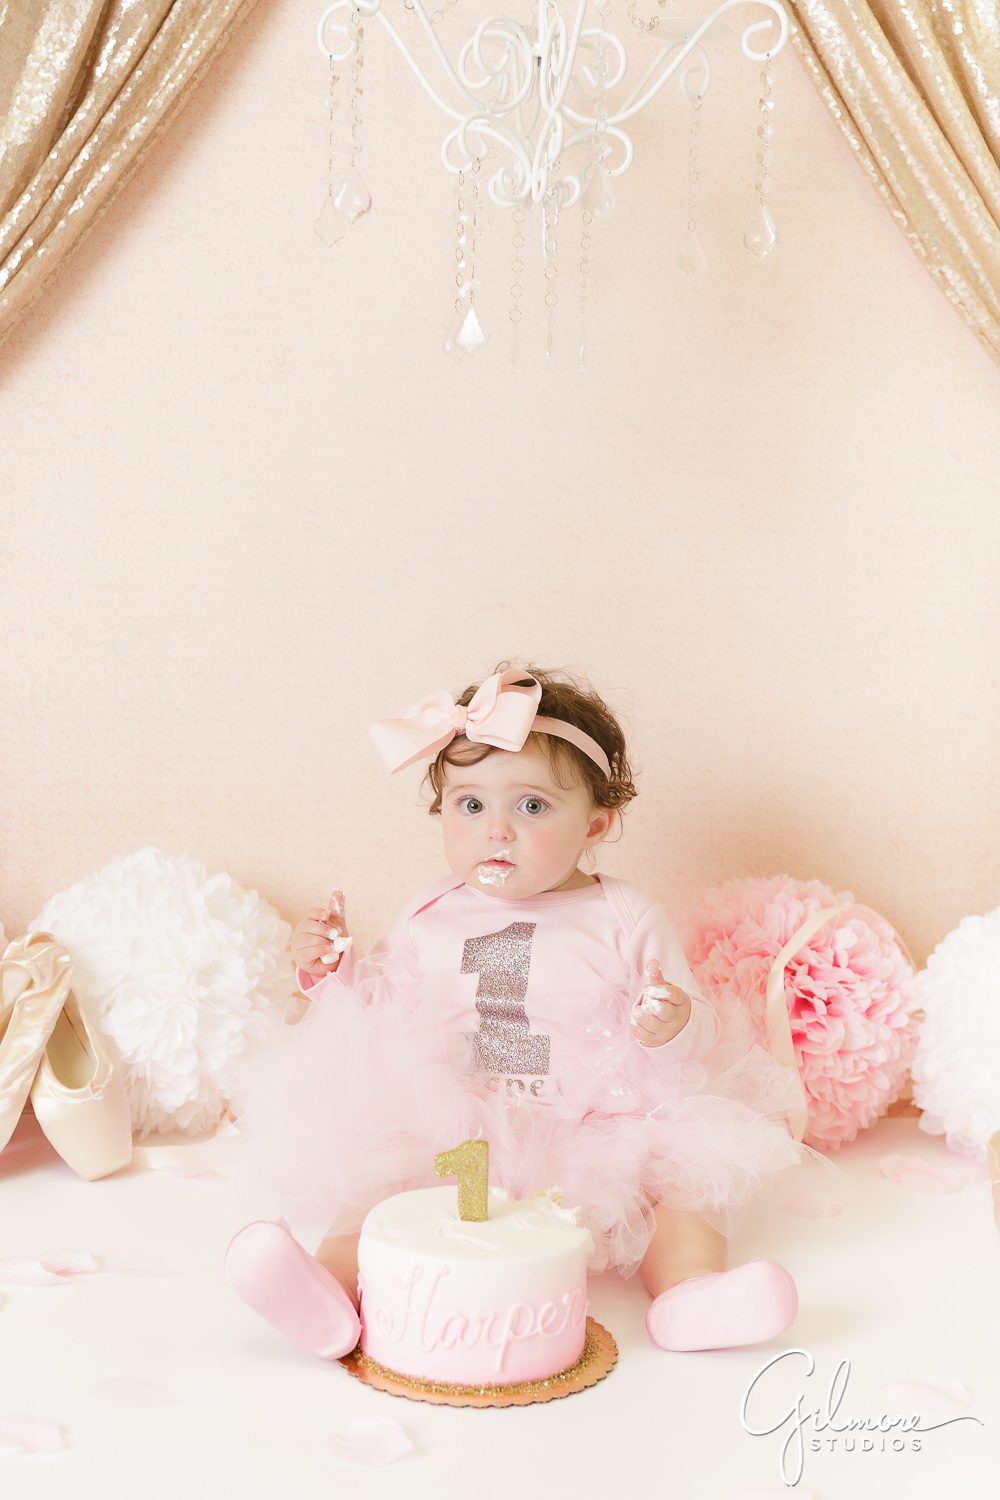 Ballerina Cake Smash Session, portrait shoot, family, baby, girl, one year old, first birthday, 1st bday, props, flowers, pom poms, pink, white, background, backdrop